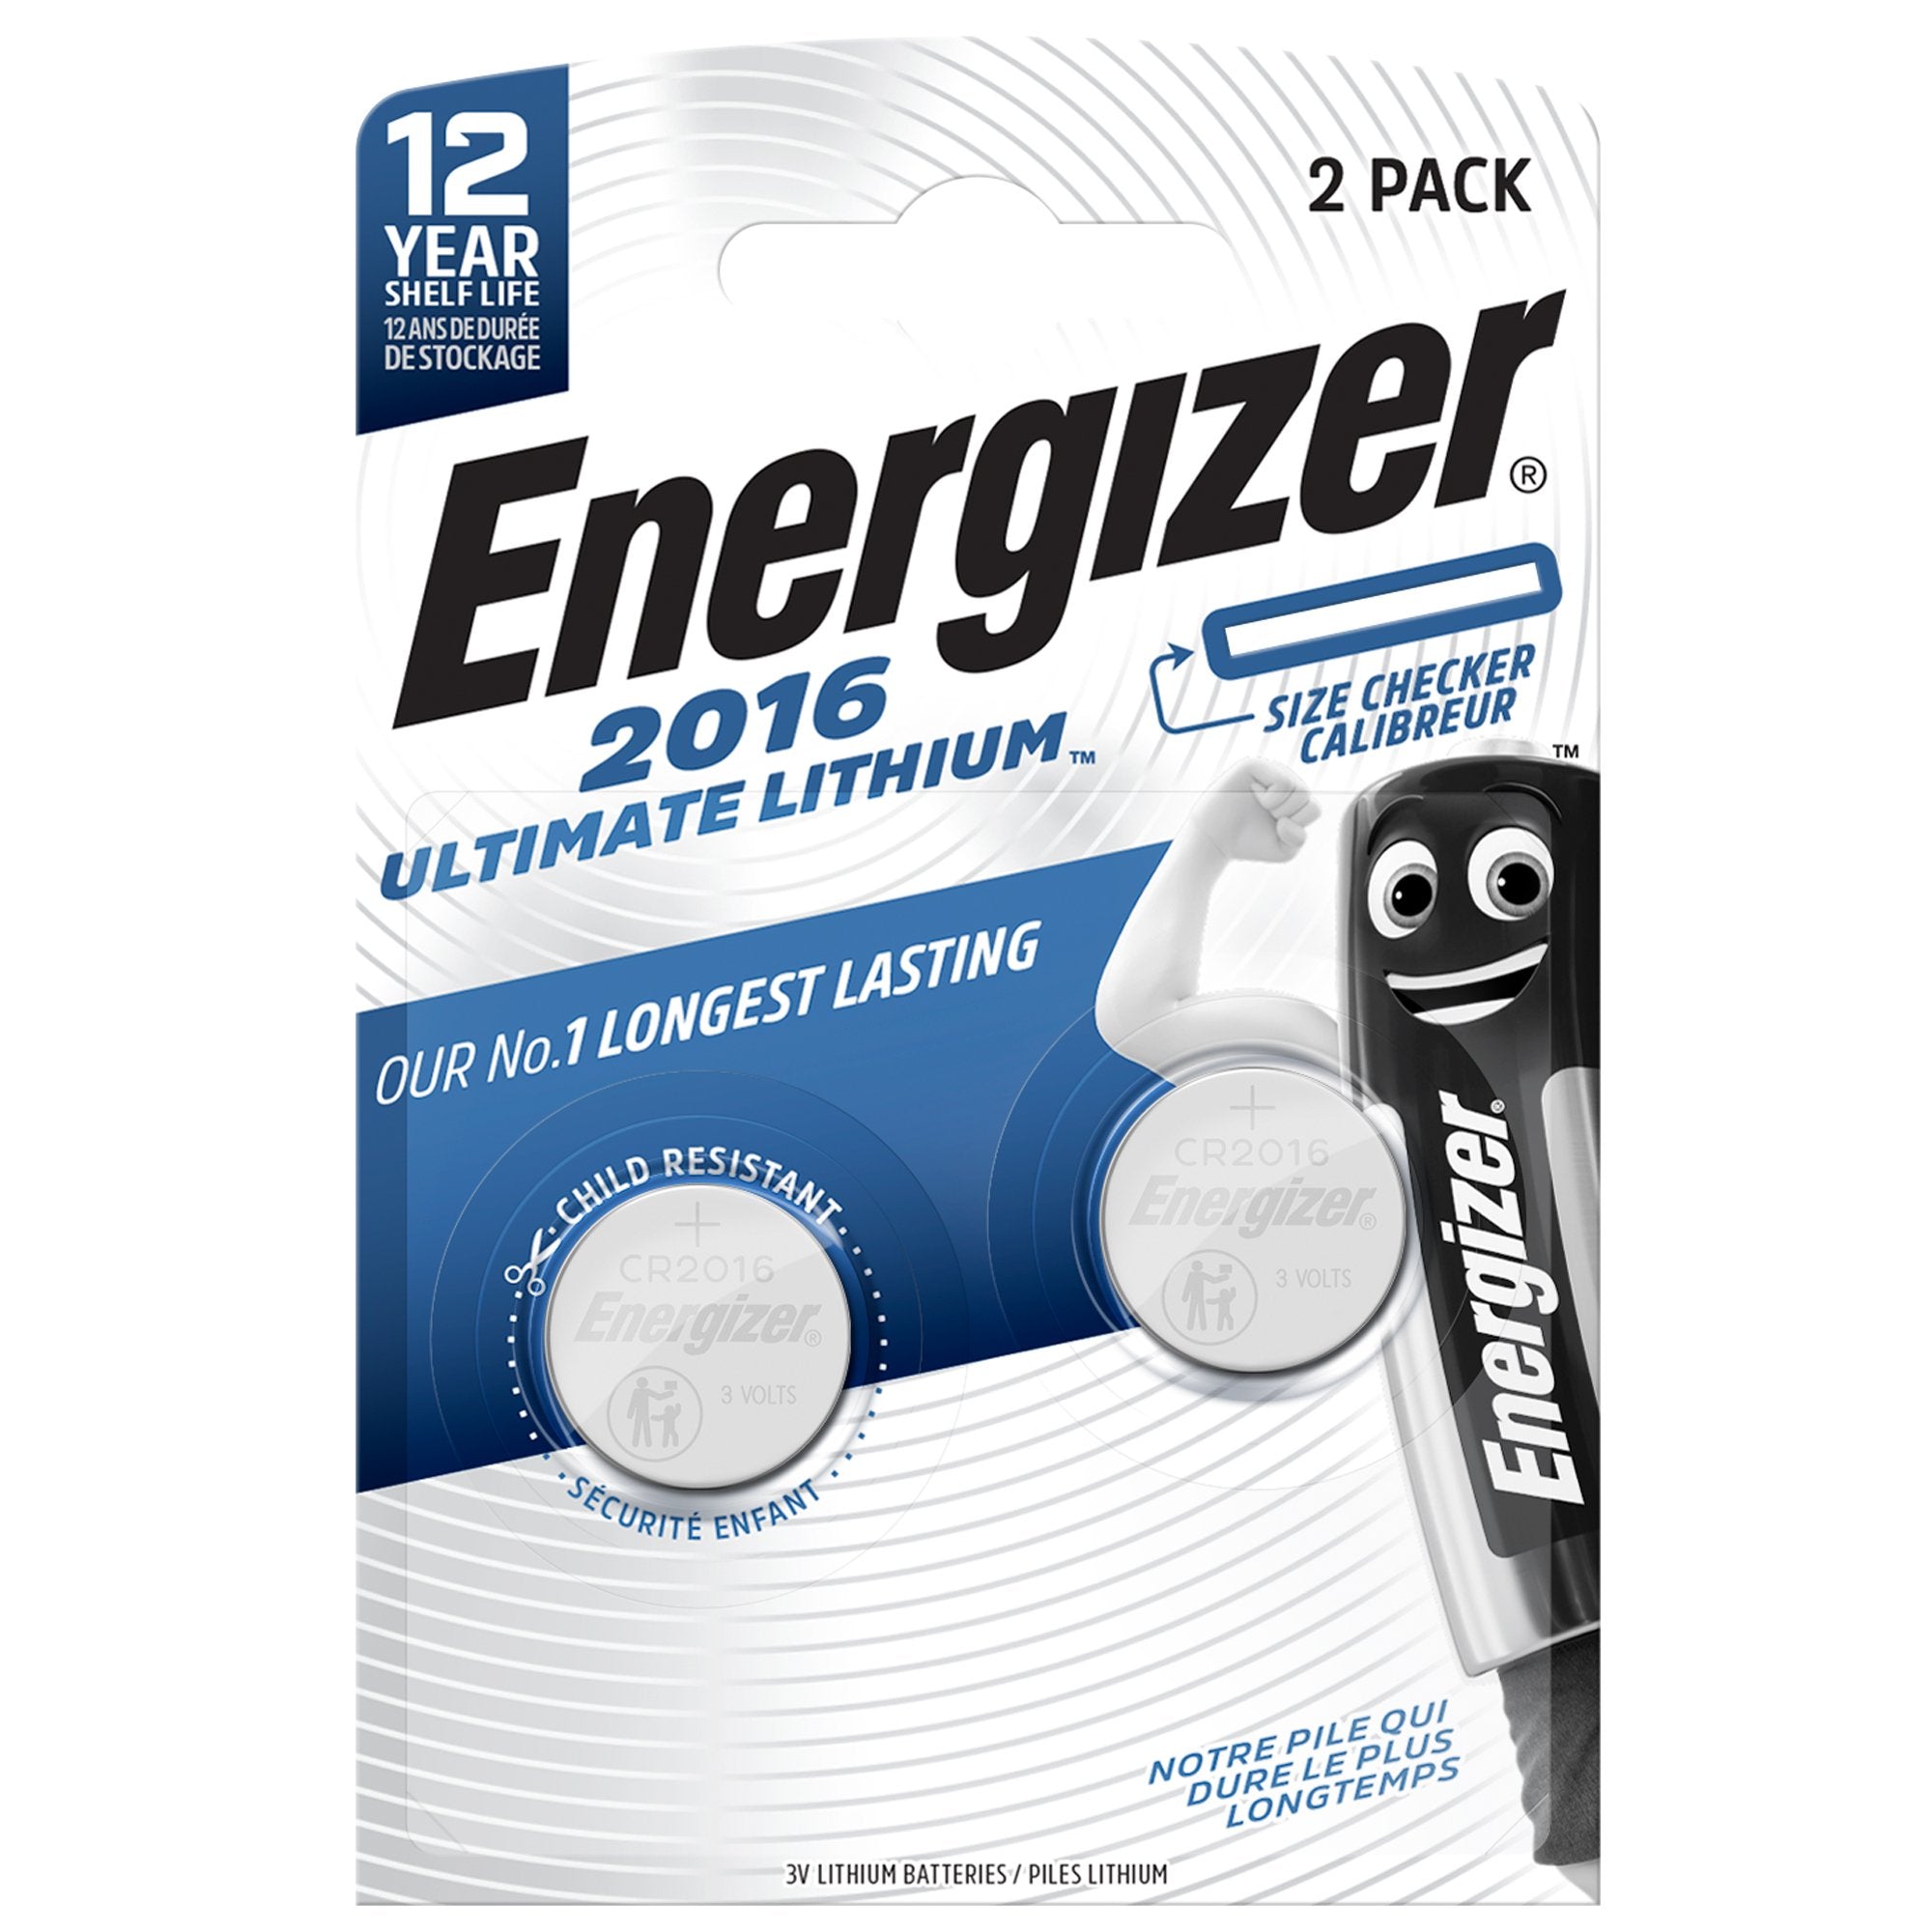 energizer-blister-2-pile-cr2016-ultimate-lithium-specialistiche